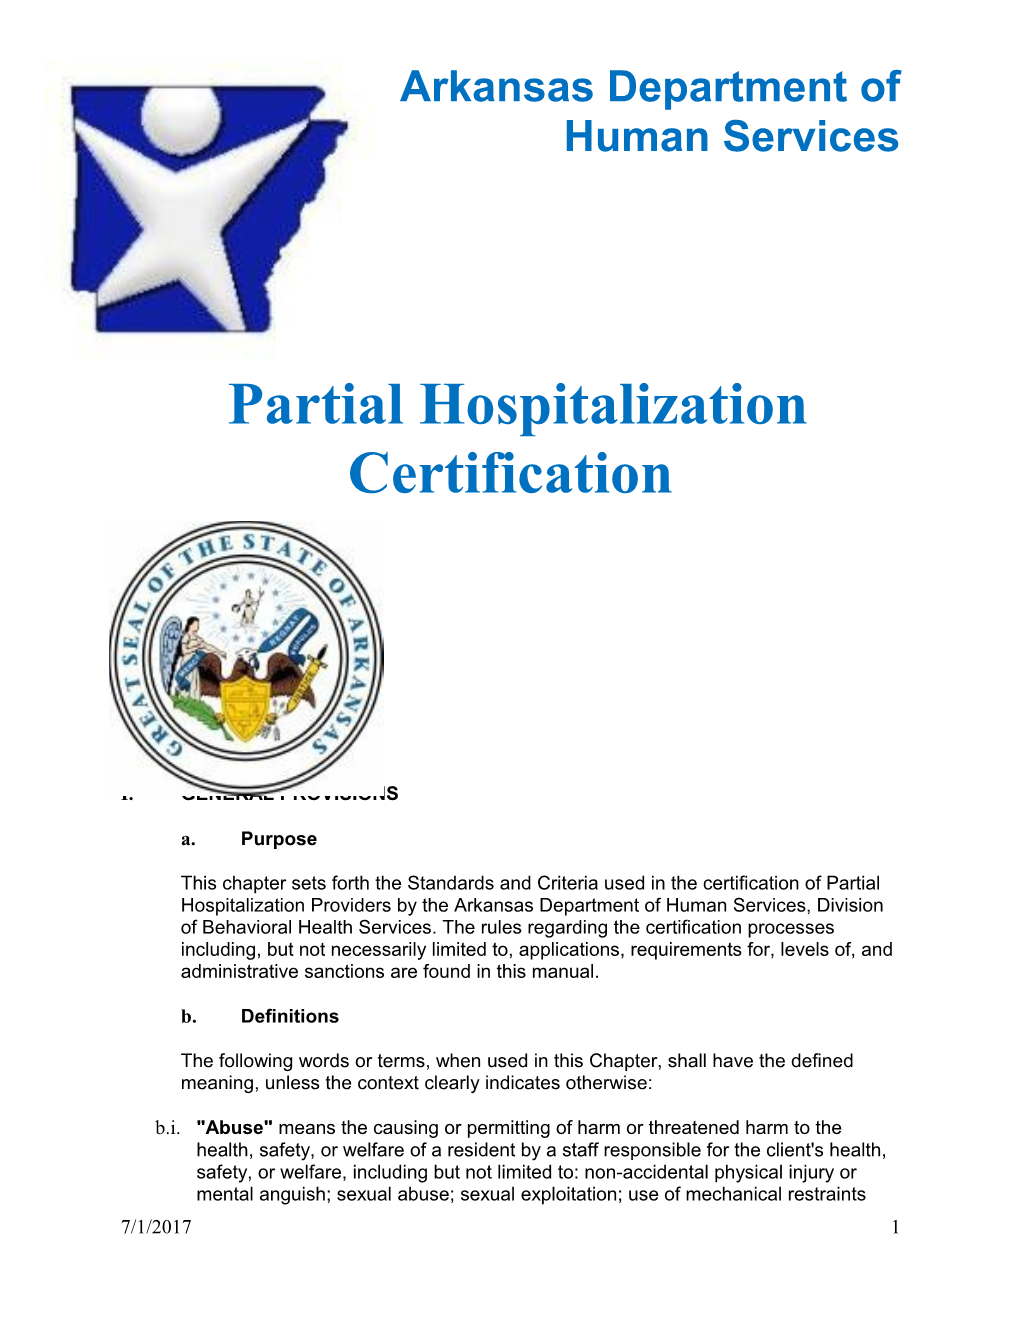 DHS Partial Hospitalization Certification - 7.1.17